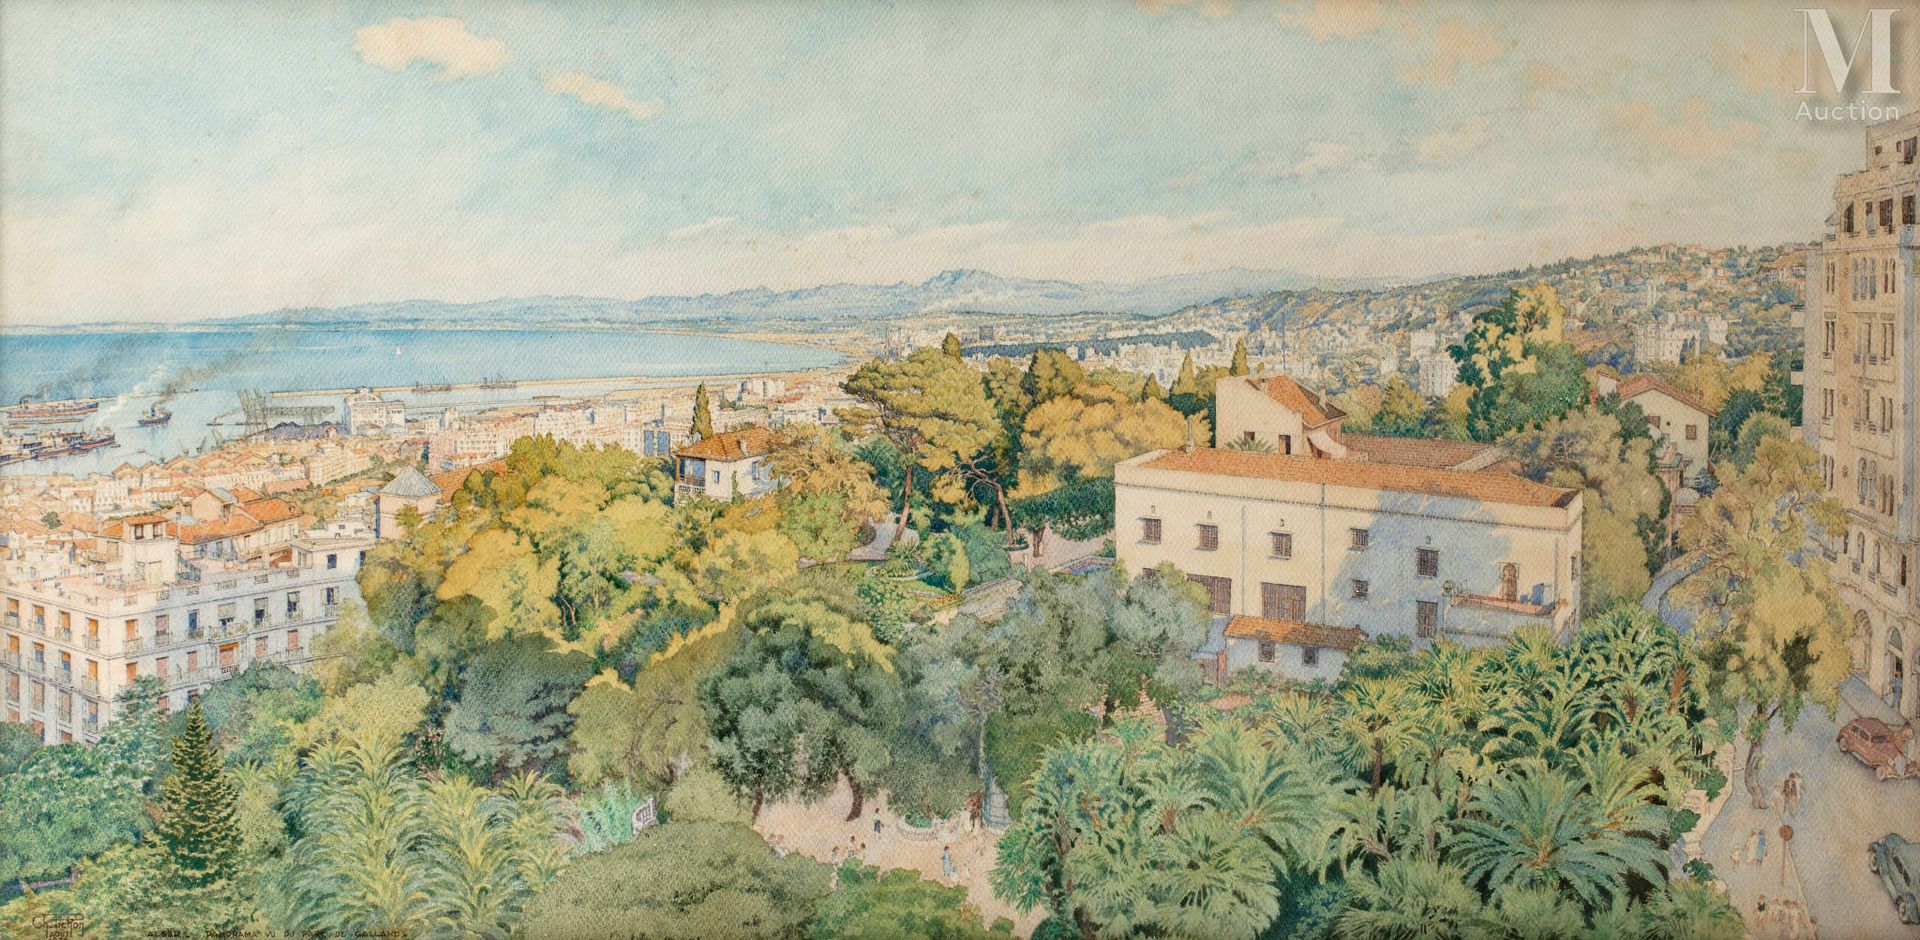 Charles PICHON (1888 - 1957) Panoramic view of Algiers, from the Galland park

C&hellip;